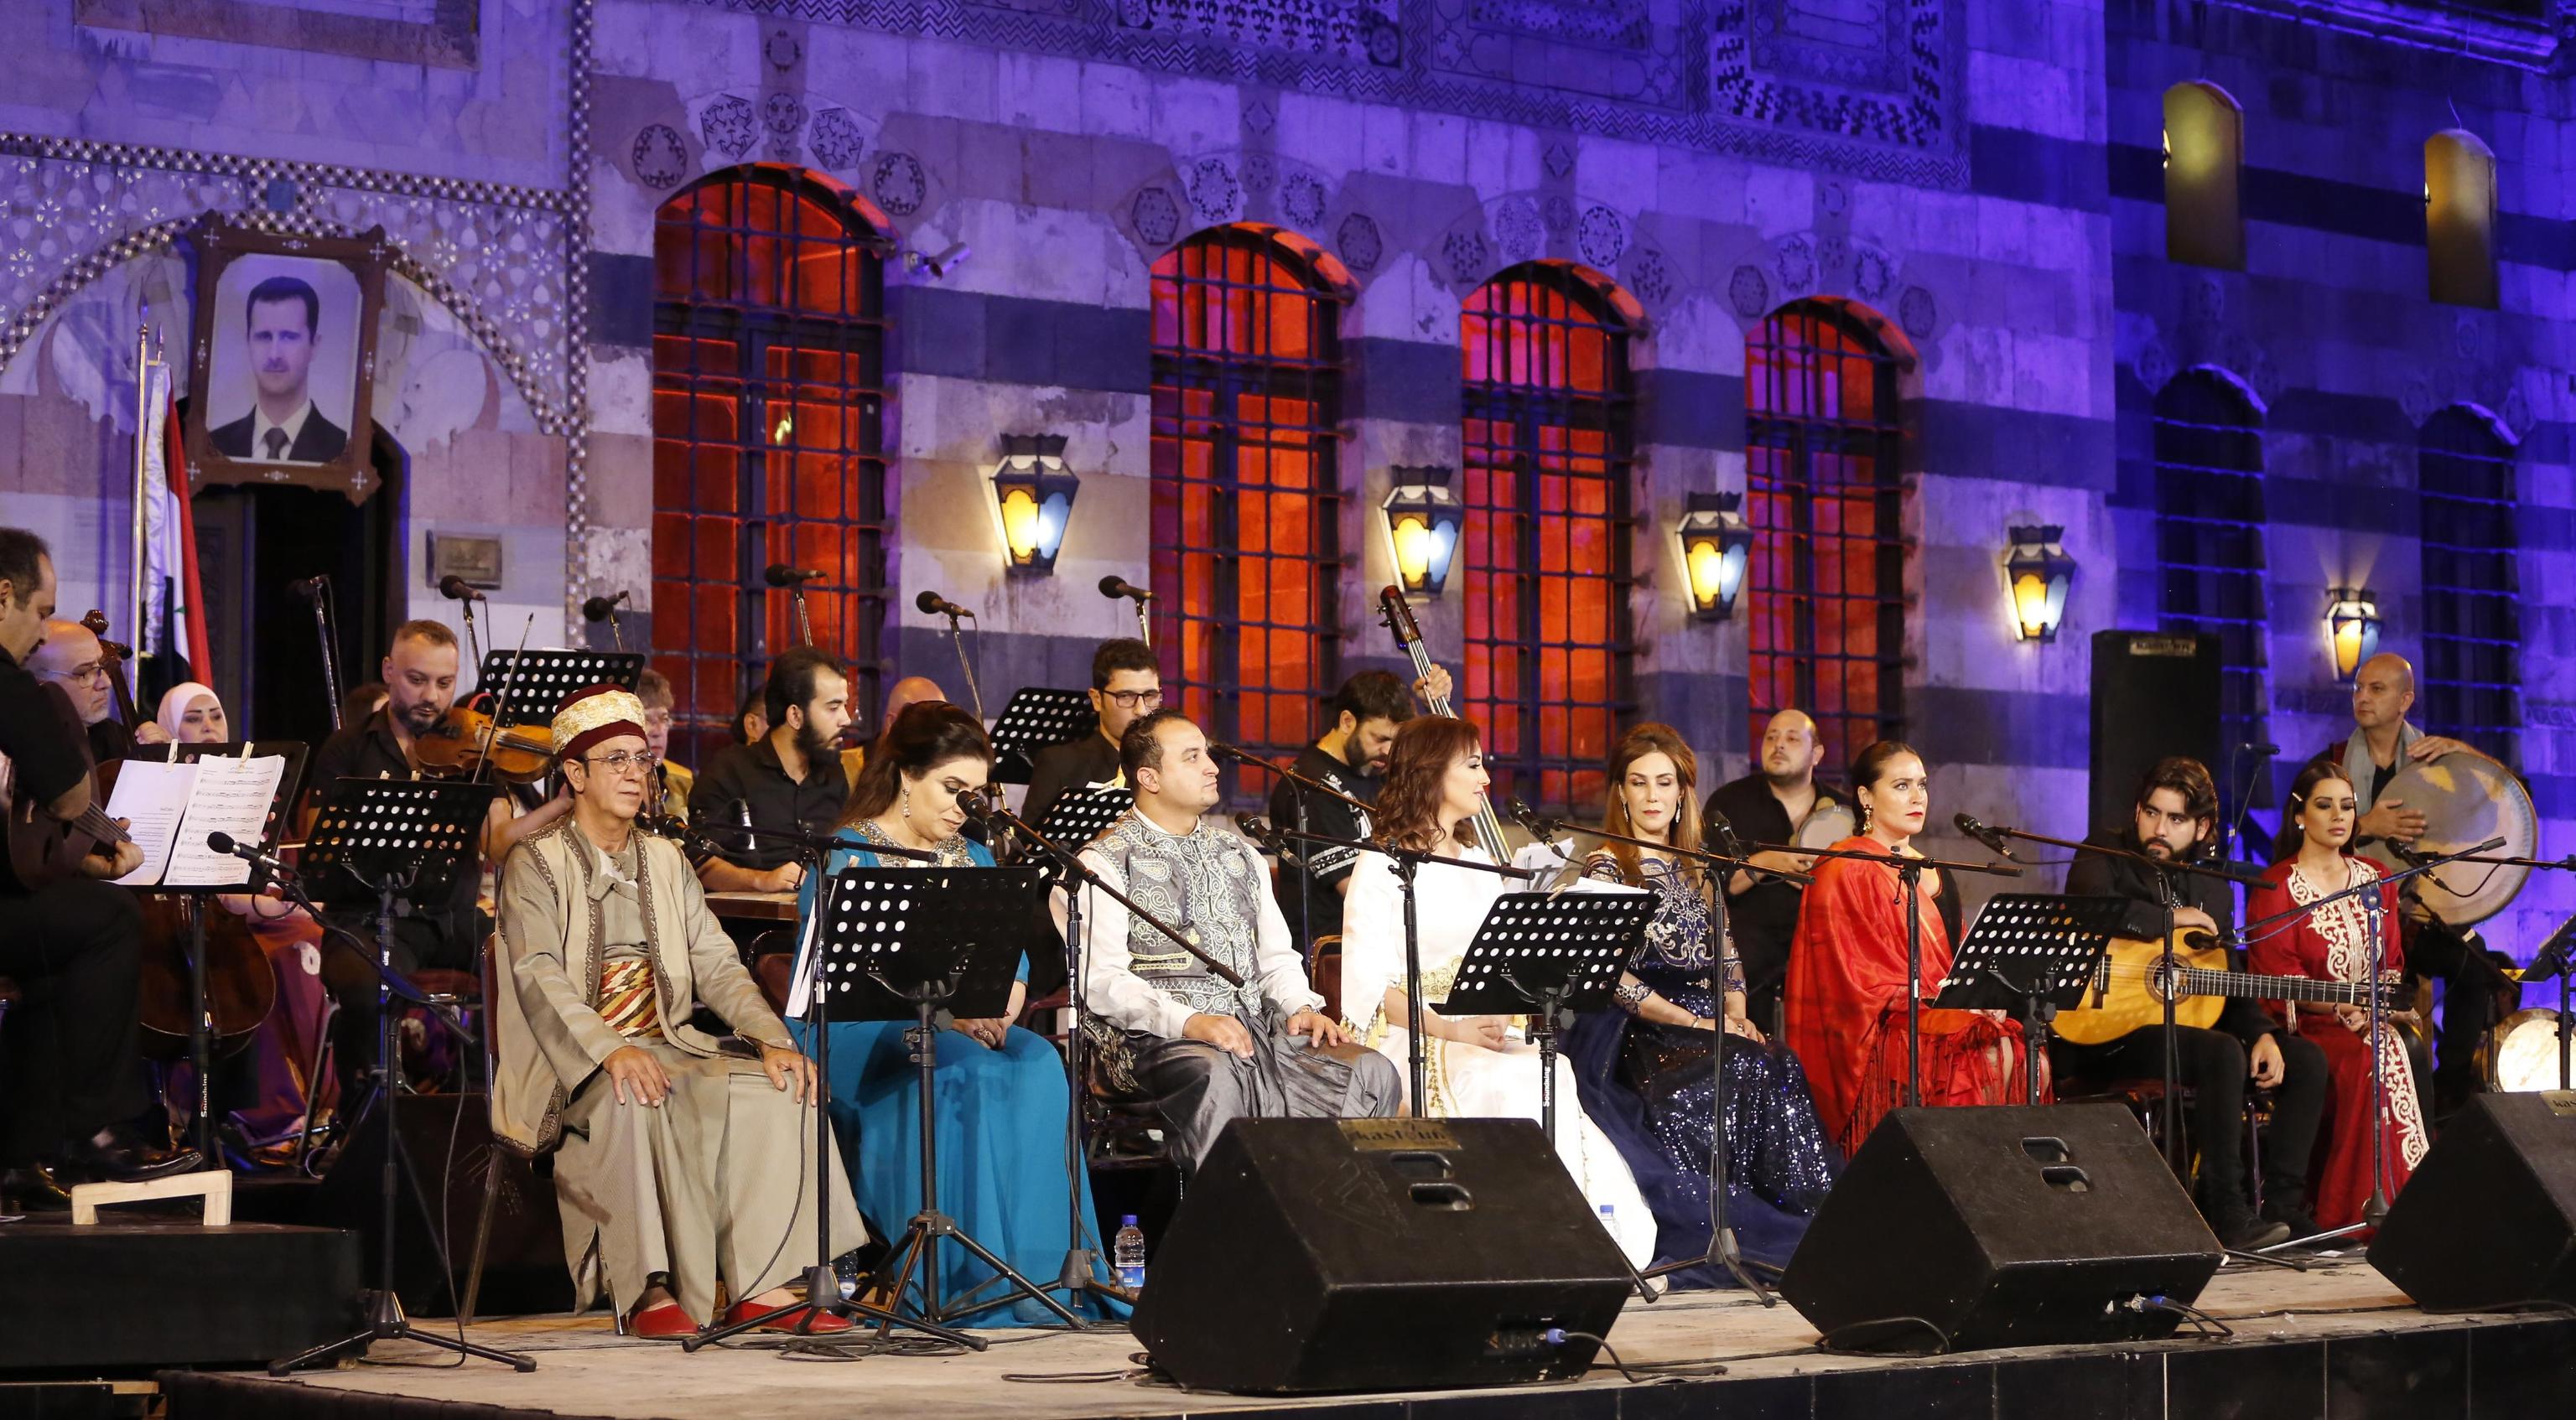 epa07840825 Singers from Arab and European countries participate in a concert held at the historical Azm Palace in the old city of Damascus, Syria, 13 August 2019. The concert, titled 'the journey of al-Mowashah (a kind of poetic singing dates back to the 9th century) from Andalusia to al-Sham'. The event is organised by the Syrian ministries of culture and tourism with the cooperation of Ein al-Fonoun Association.  EPA/YOUSSEF BADAWI